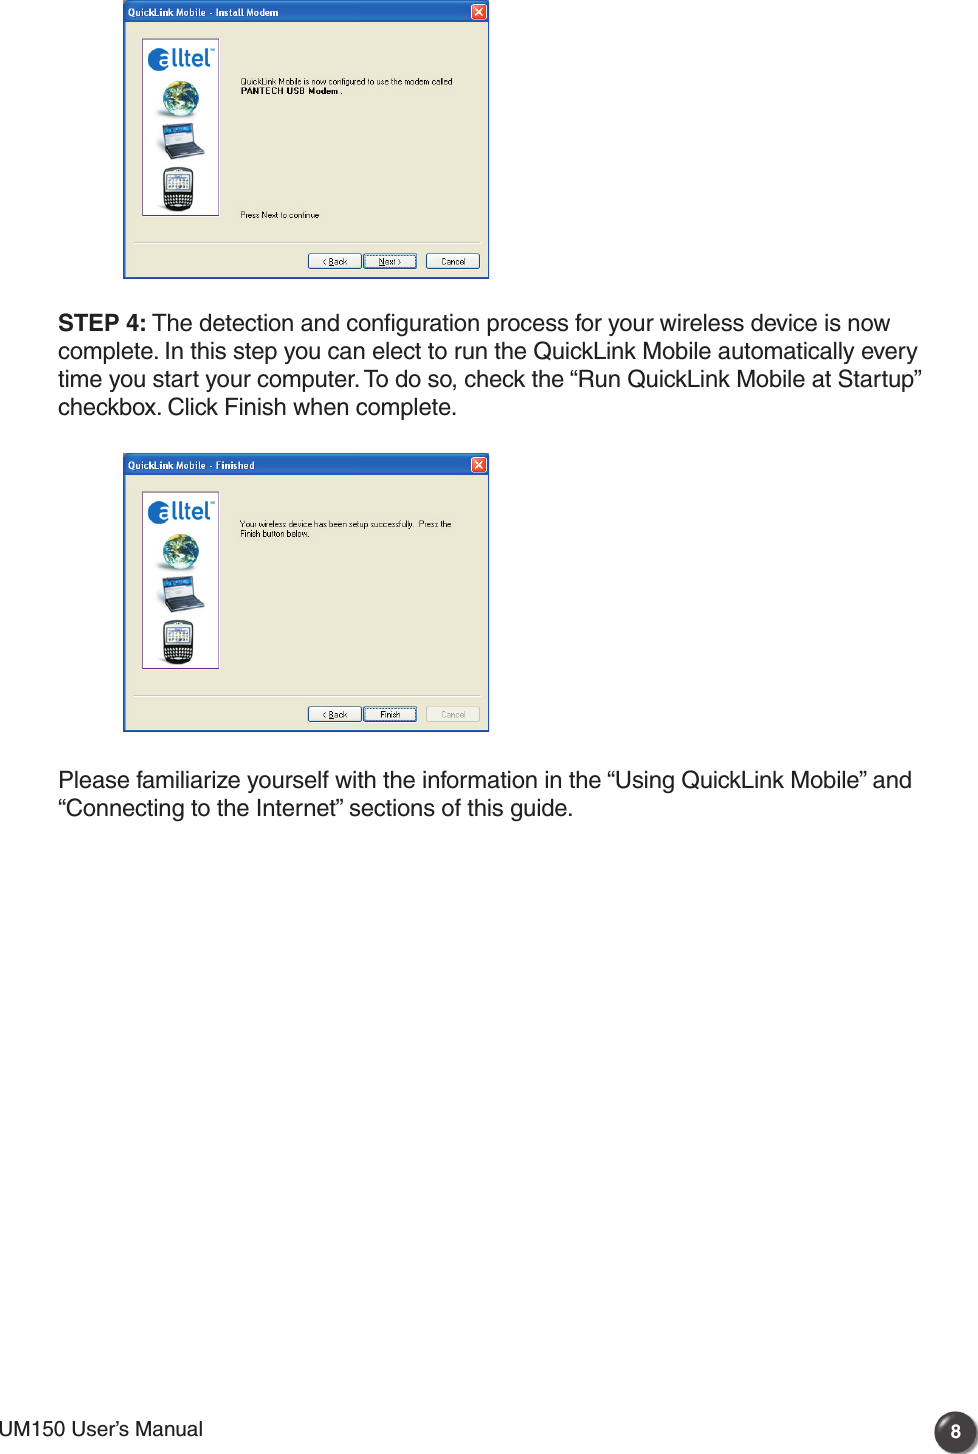 UM150 User’s Manual 8UM150 User’s Manual STEP 4: The detection and configuration process for your wireless device is now complete. In this step you can elect to run the QuickLink Mobile automatically every time you start your computer. To do so, check the “Run QuickLink Mobile at Startup” checkbox. Click Finish when complete. Please familiarize yourself with the information in the “Using QuickLink Mobile” and “Connecting to the Internet” sections of this guide.